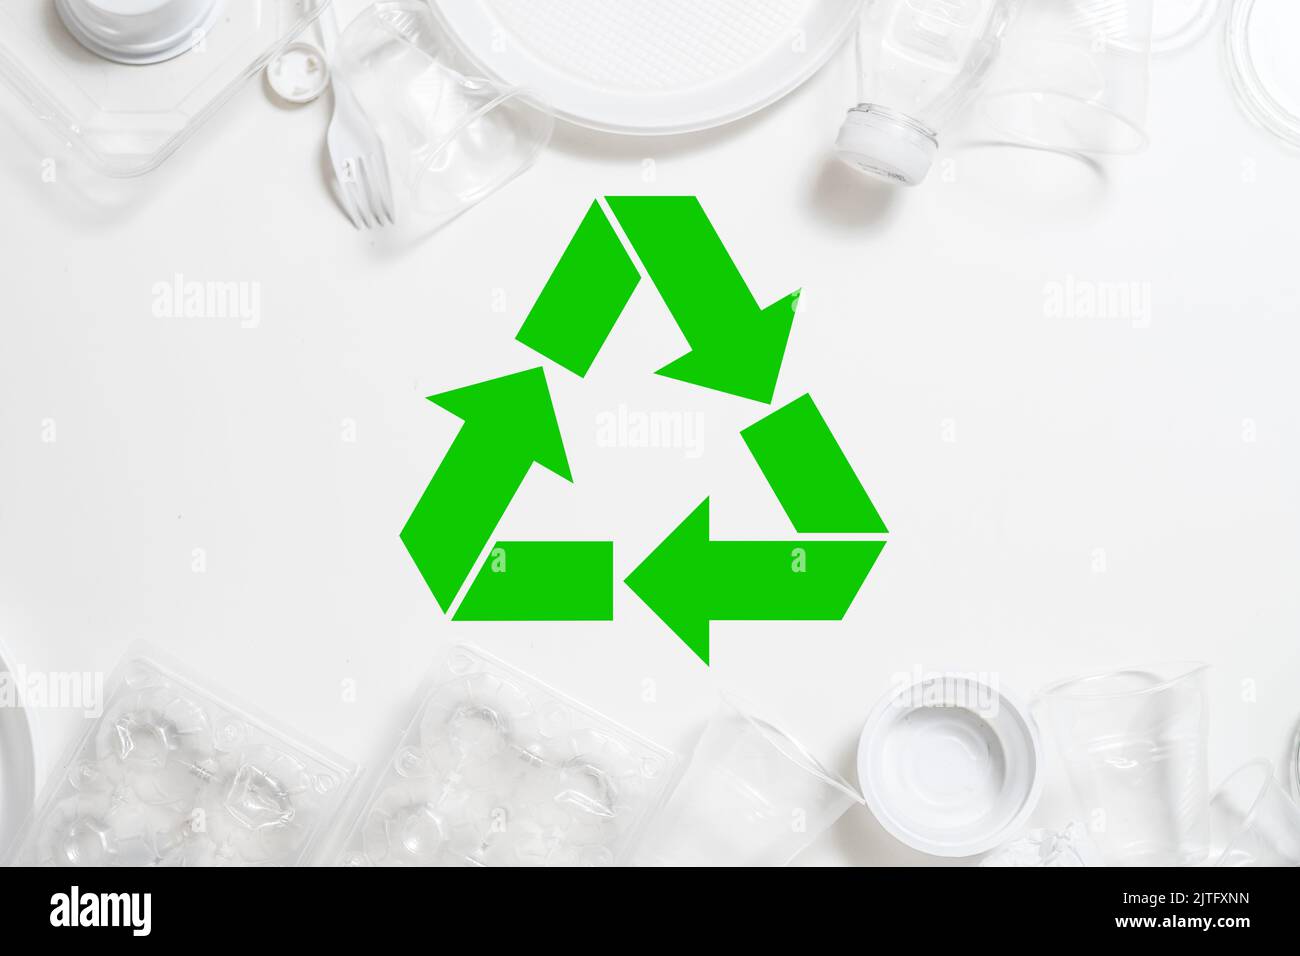 ecology waste management recycling plastic dispose Stock Photo